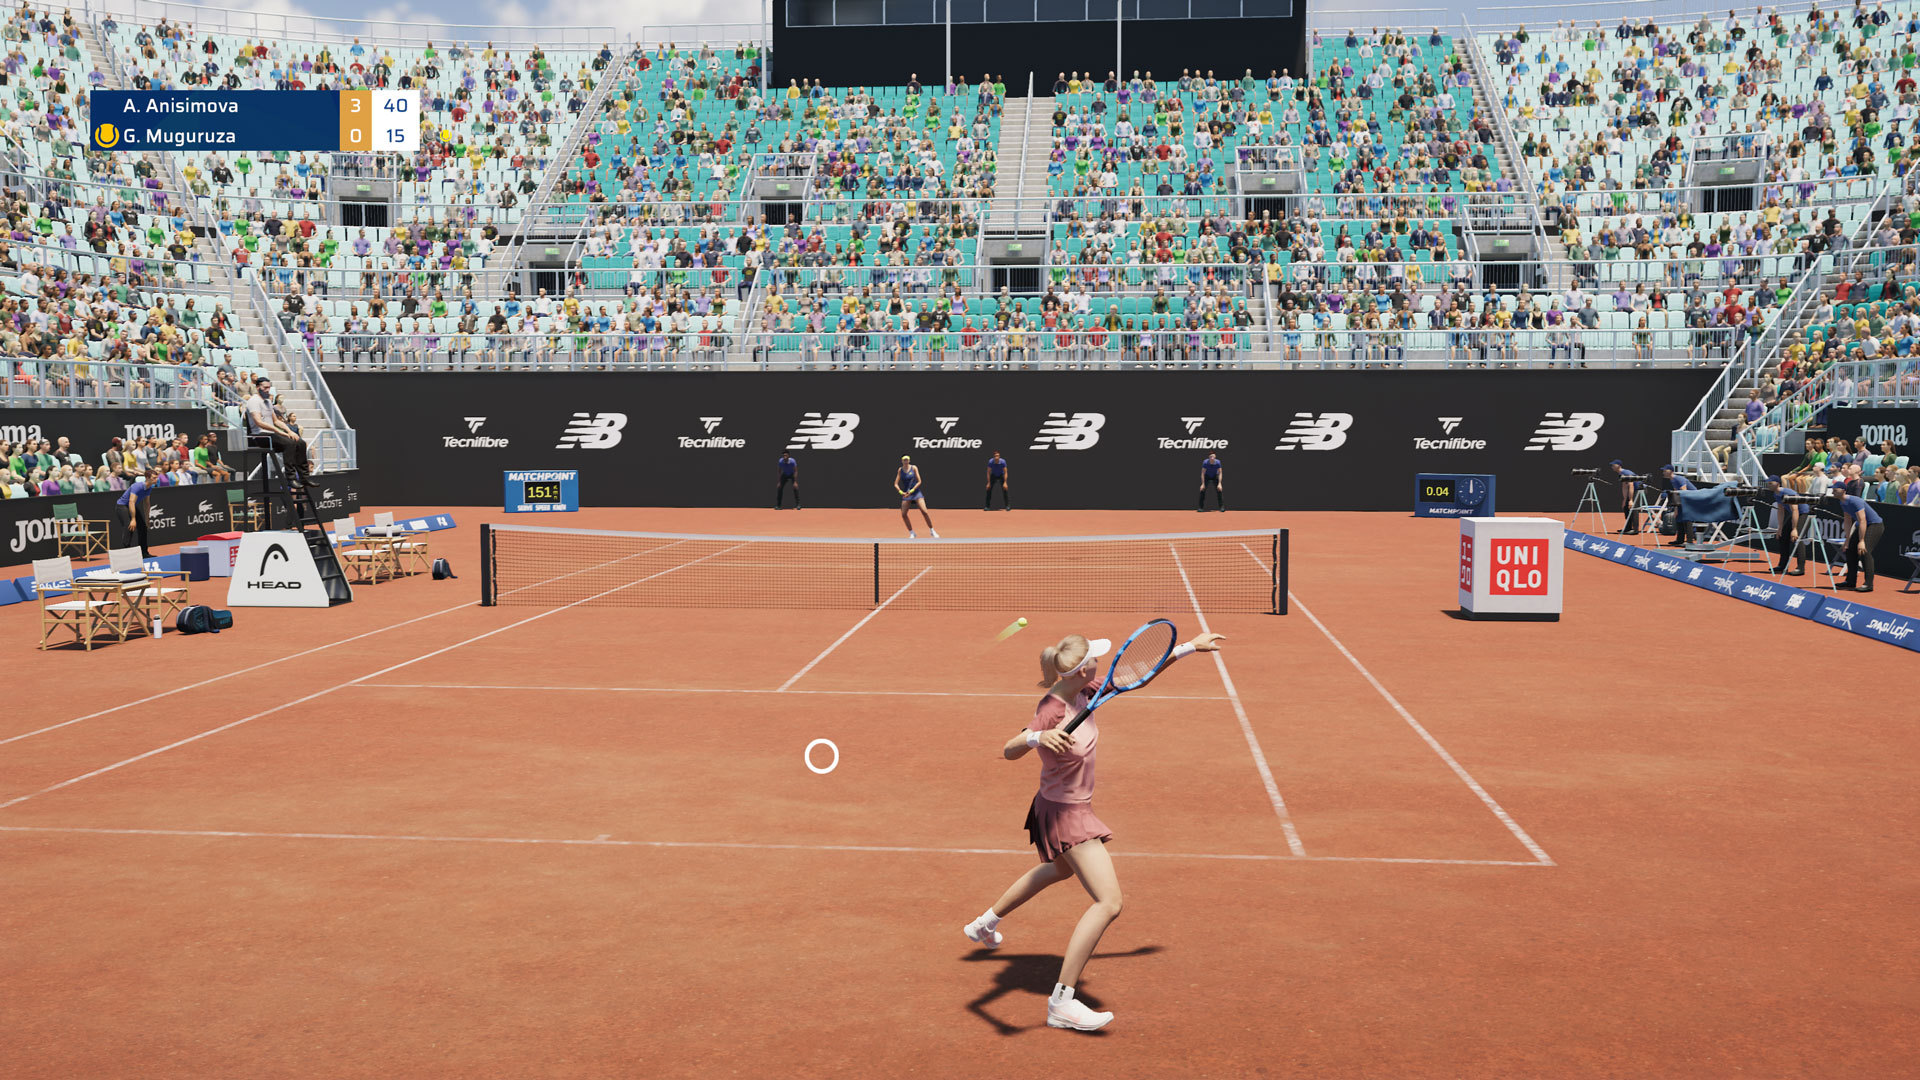 Matchpoint Tennis Championships, Xbox Series X, Review, Tennis, Simulation, Sports, Gameplay, Screenshots, Tournament, NoobFeed